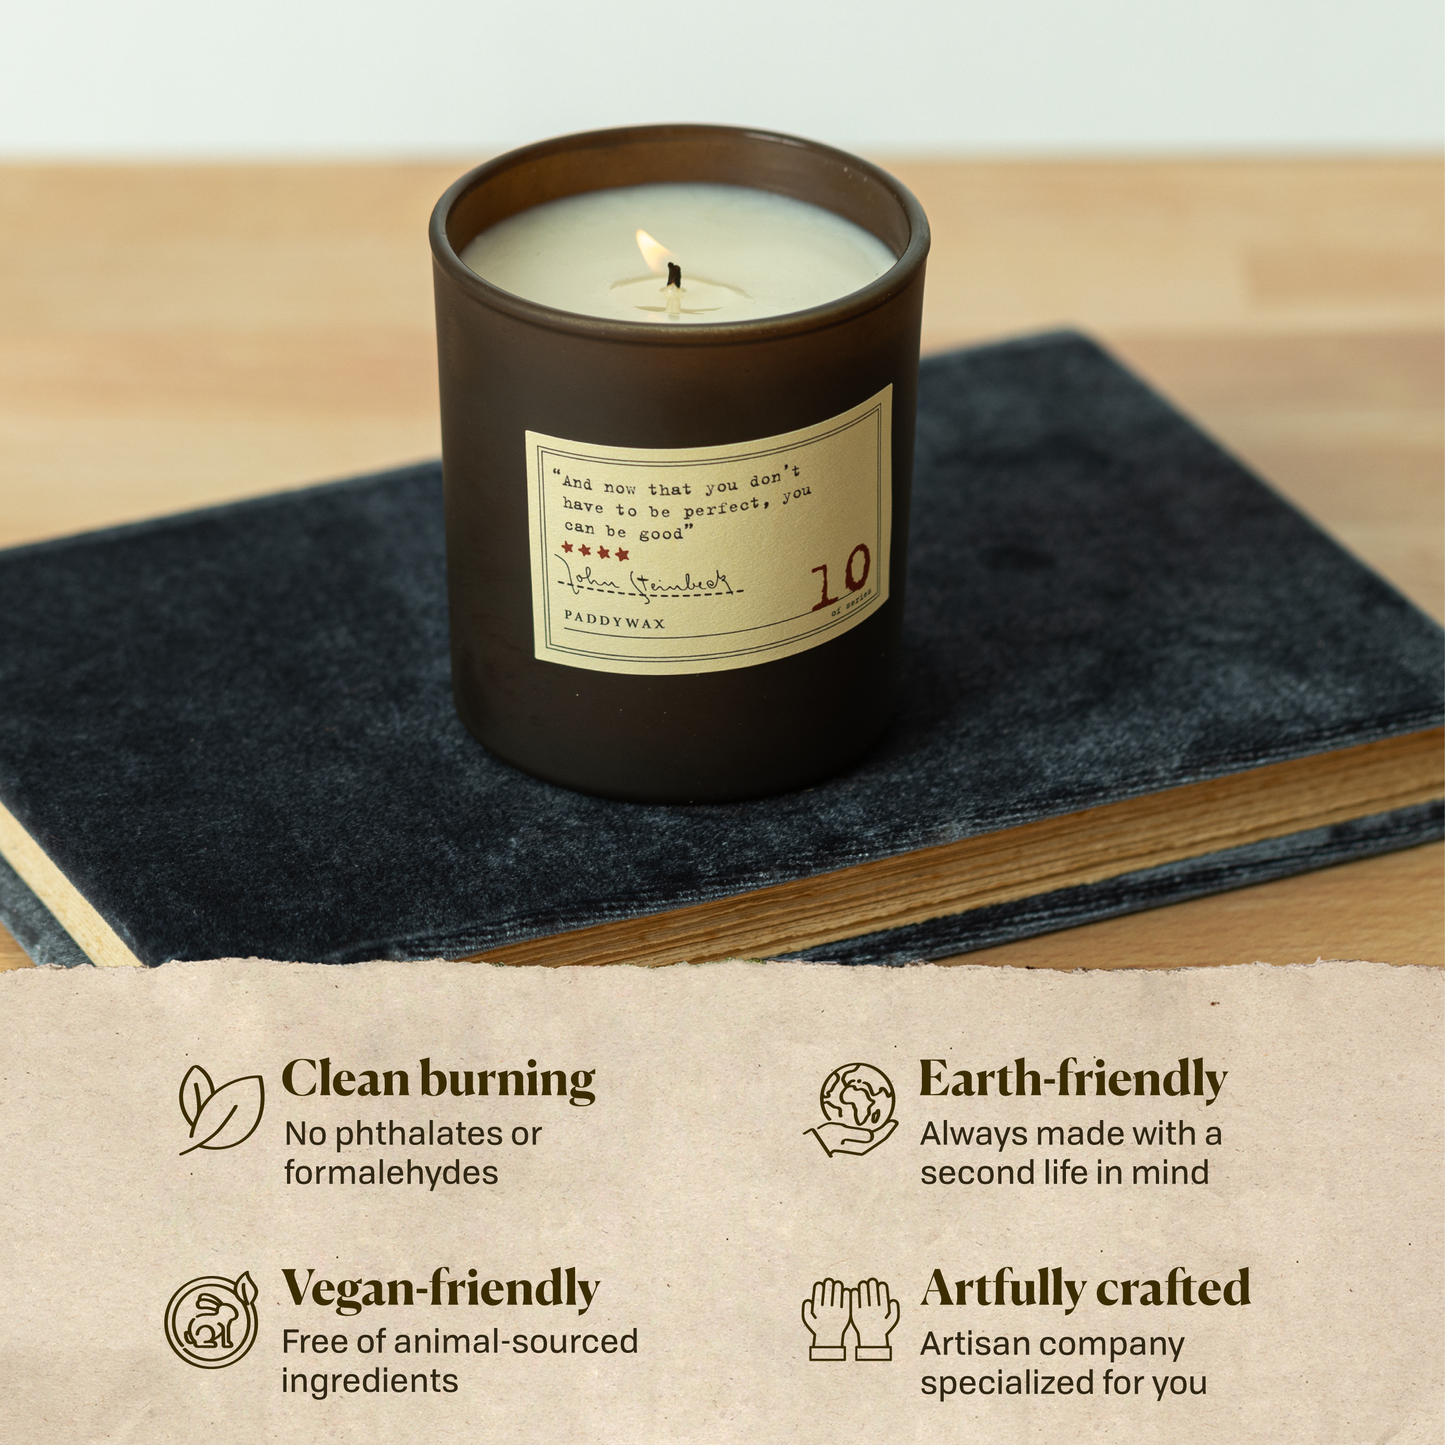 A photo of the John Steinbeck candle sitting on a book. Clean burning: no phthalates or formaldehydes. Earth-friendly: Always made with a second life in mind. Vegan-friendly: Free of animal sourced ingredients. Artfully crafted: Artisan company specialized for you.